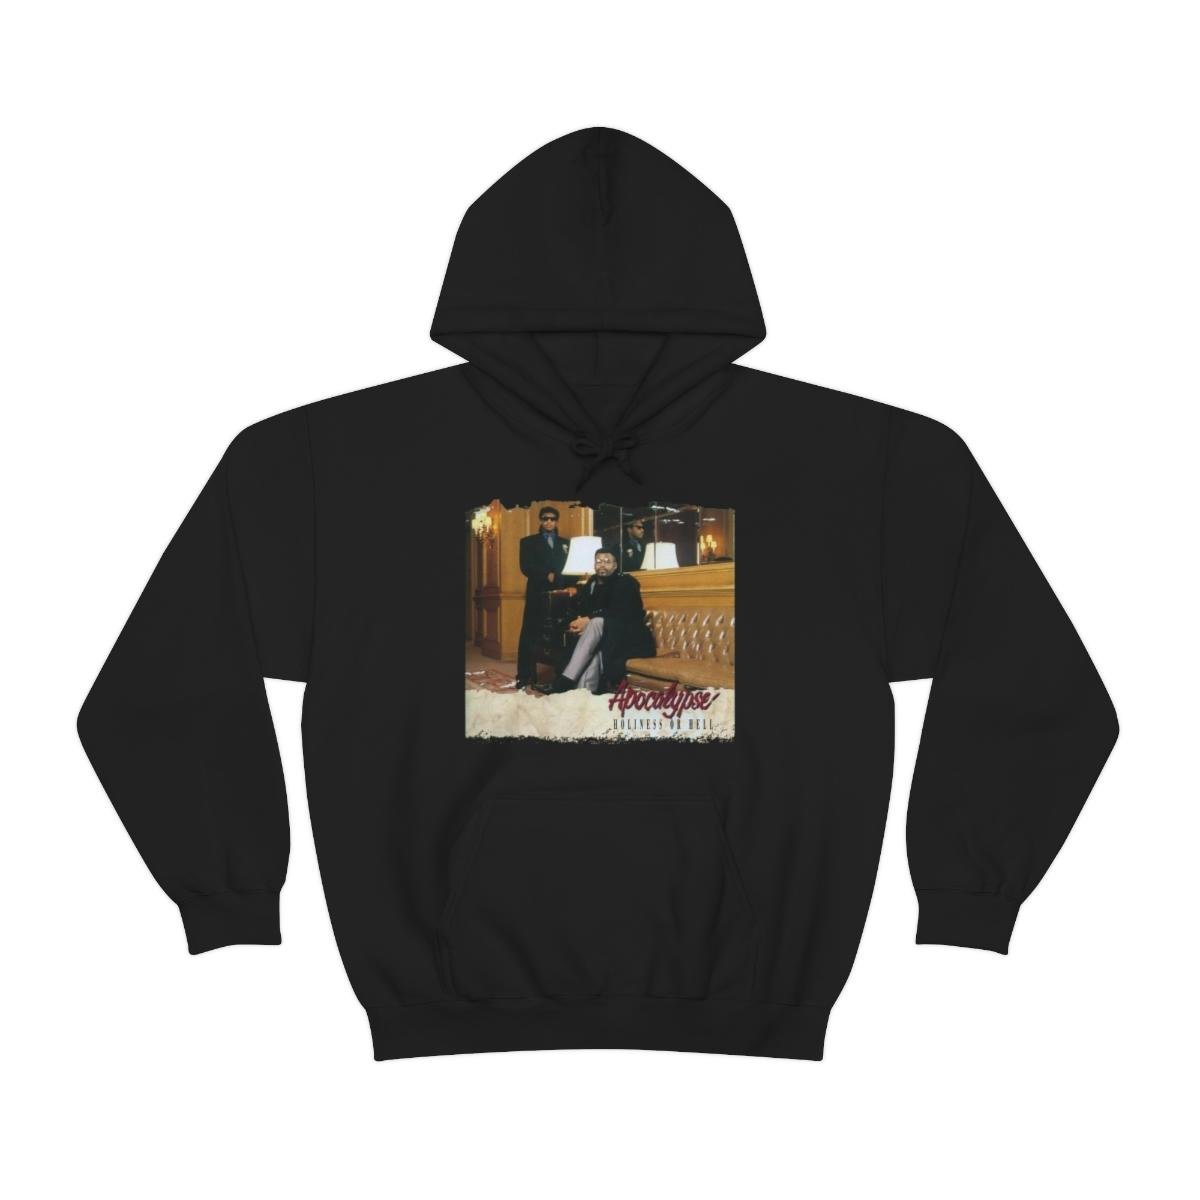 Apocalypse – Holiness Or Hell Pullover Hooded Sweatshirt